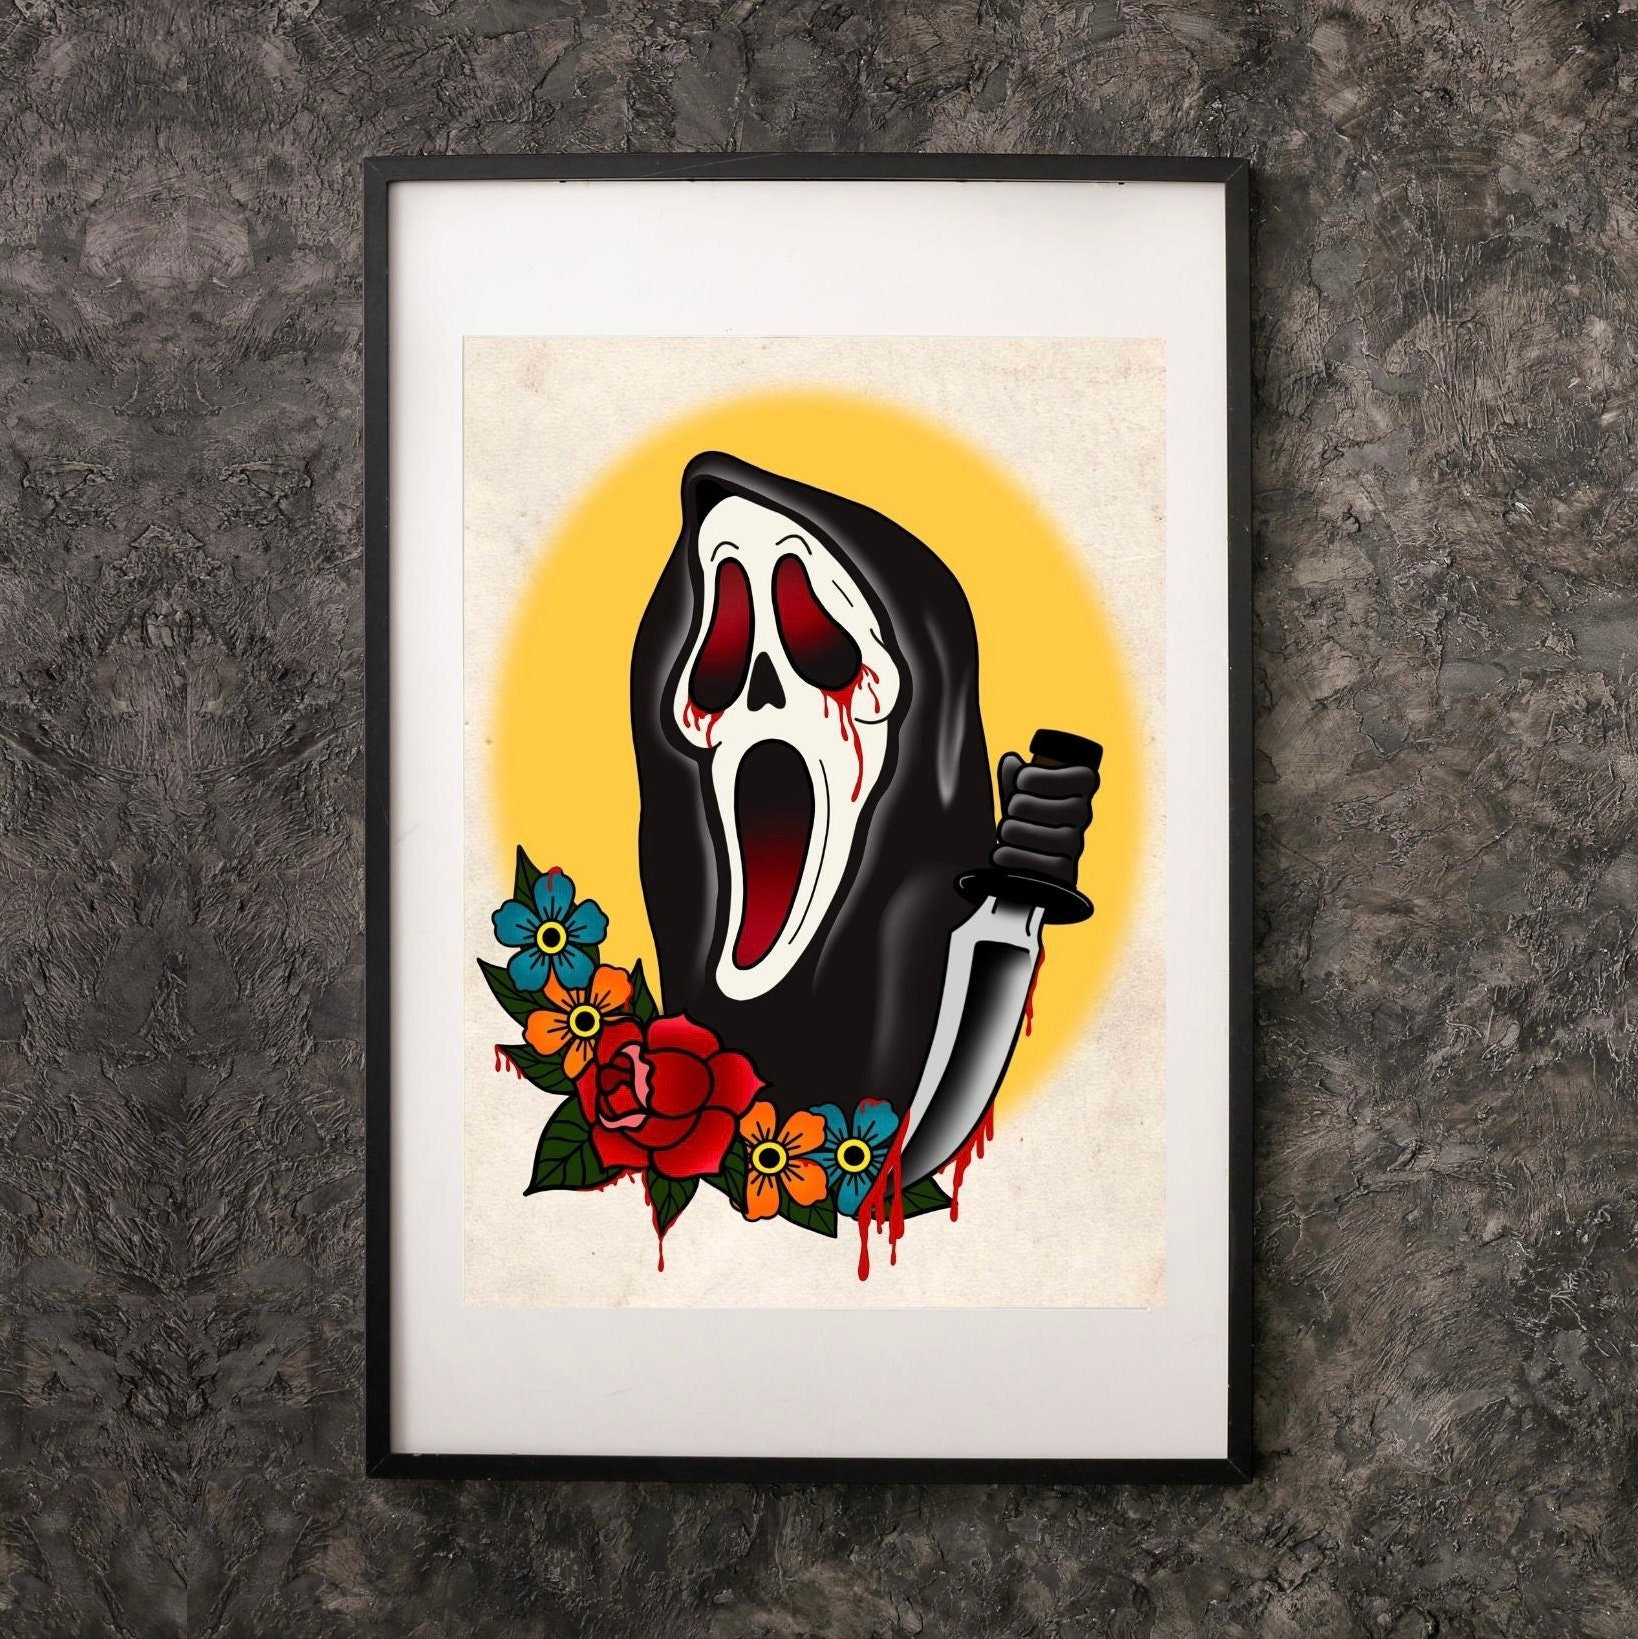 Tiny Ghostface Scream Knife Tattoo by jackthereaper on DeviantArt